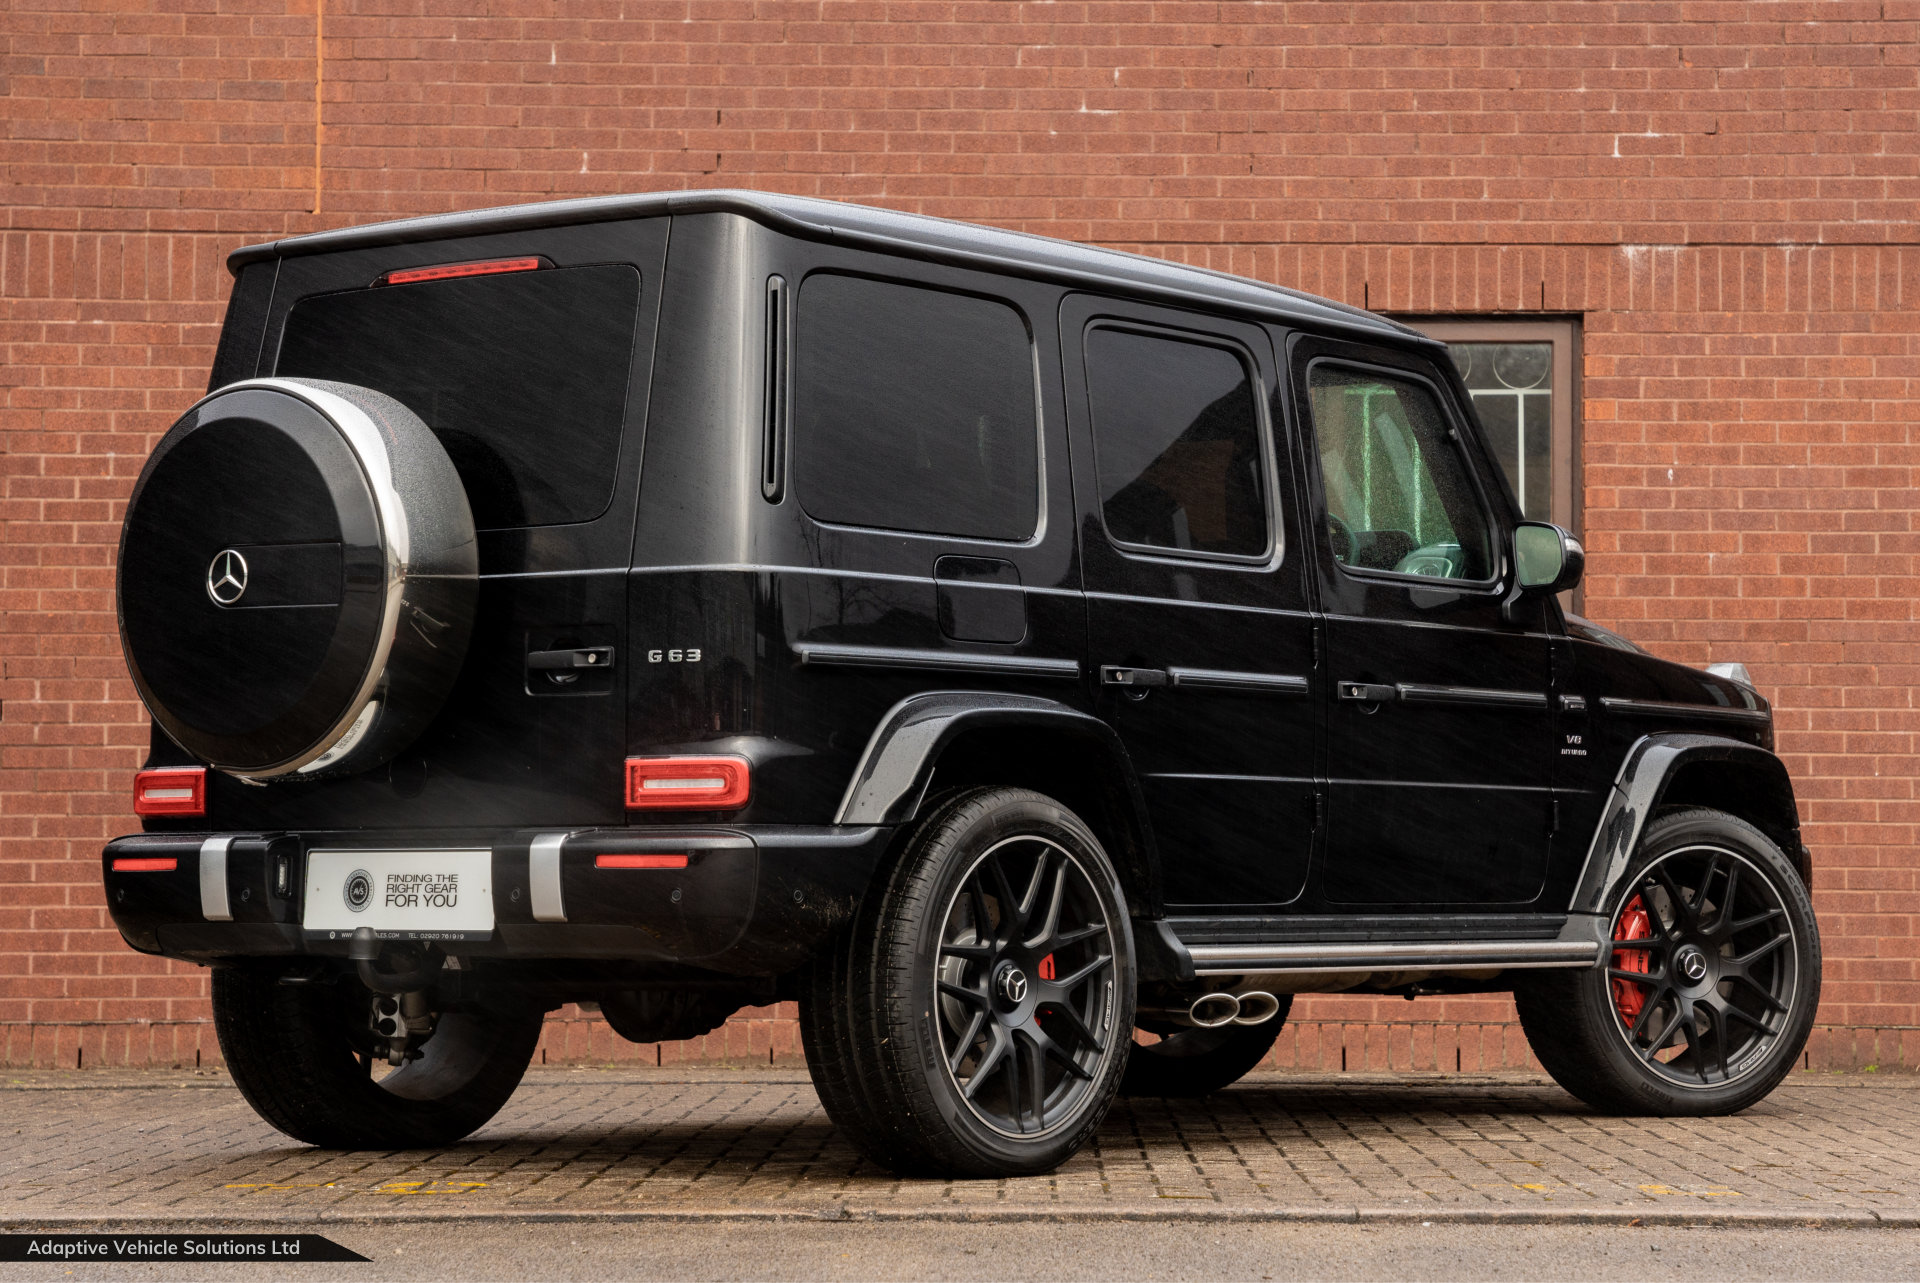 2021 Mercedes Benz G63 AMG Black off side rear view